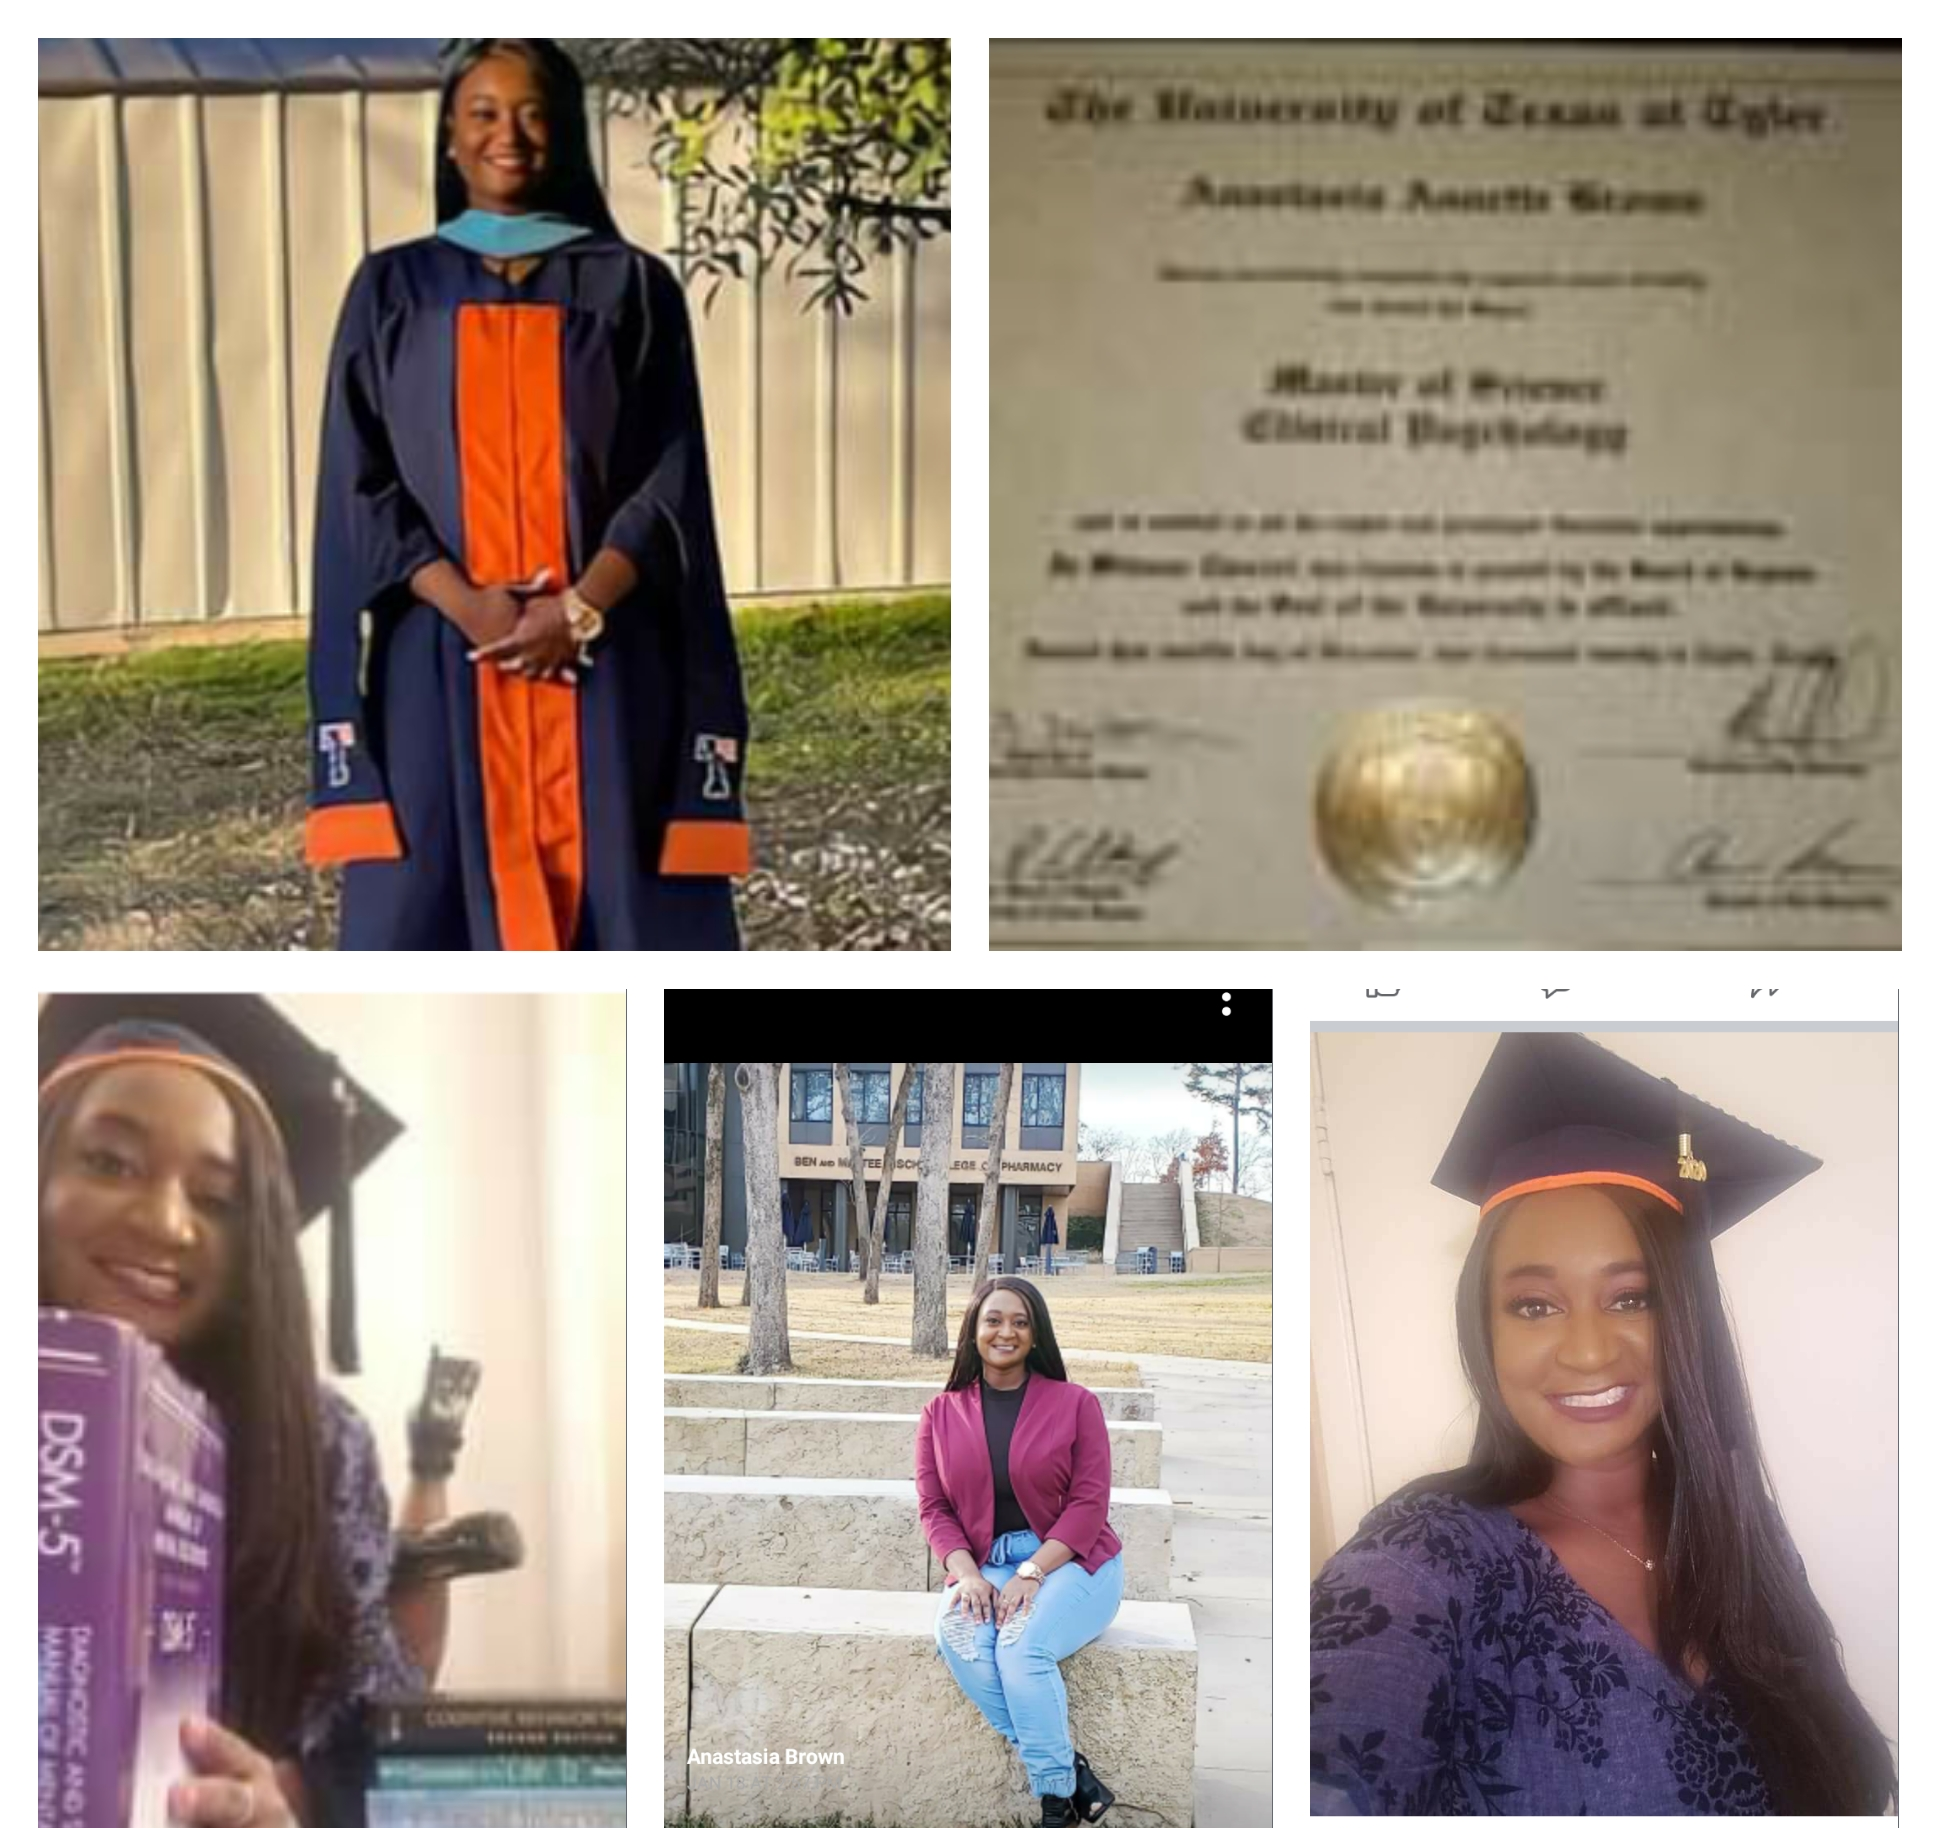 Congratulations: Anastasia Brown (Master of Science in Clinical Psychology) from The University of Texas at Tyler December 2020